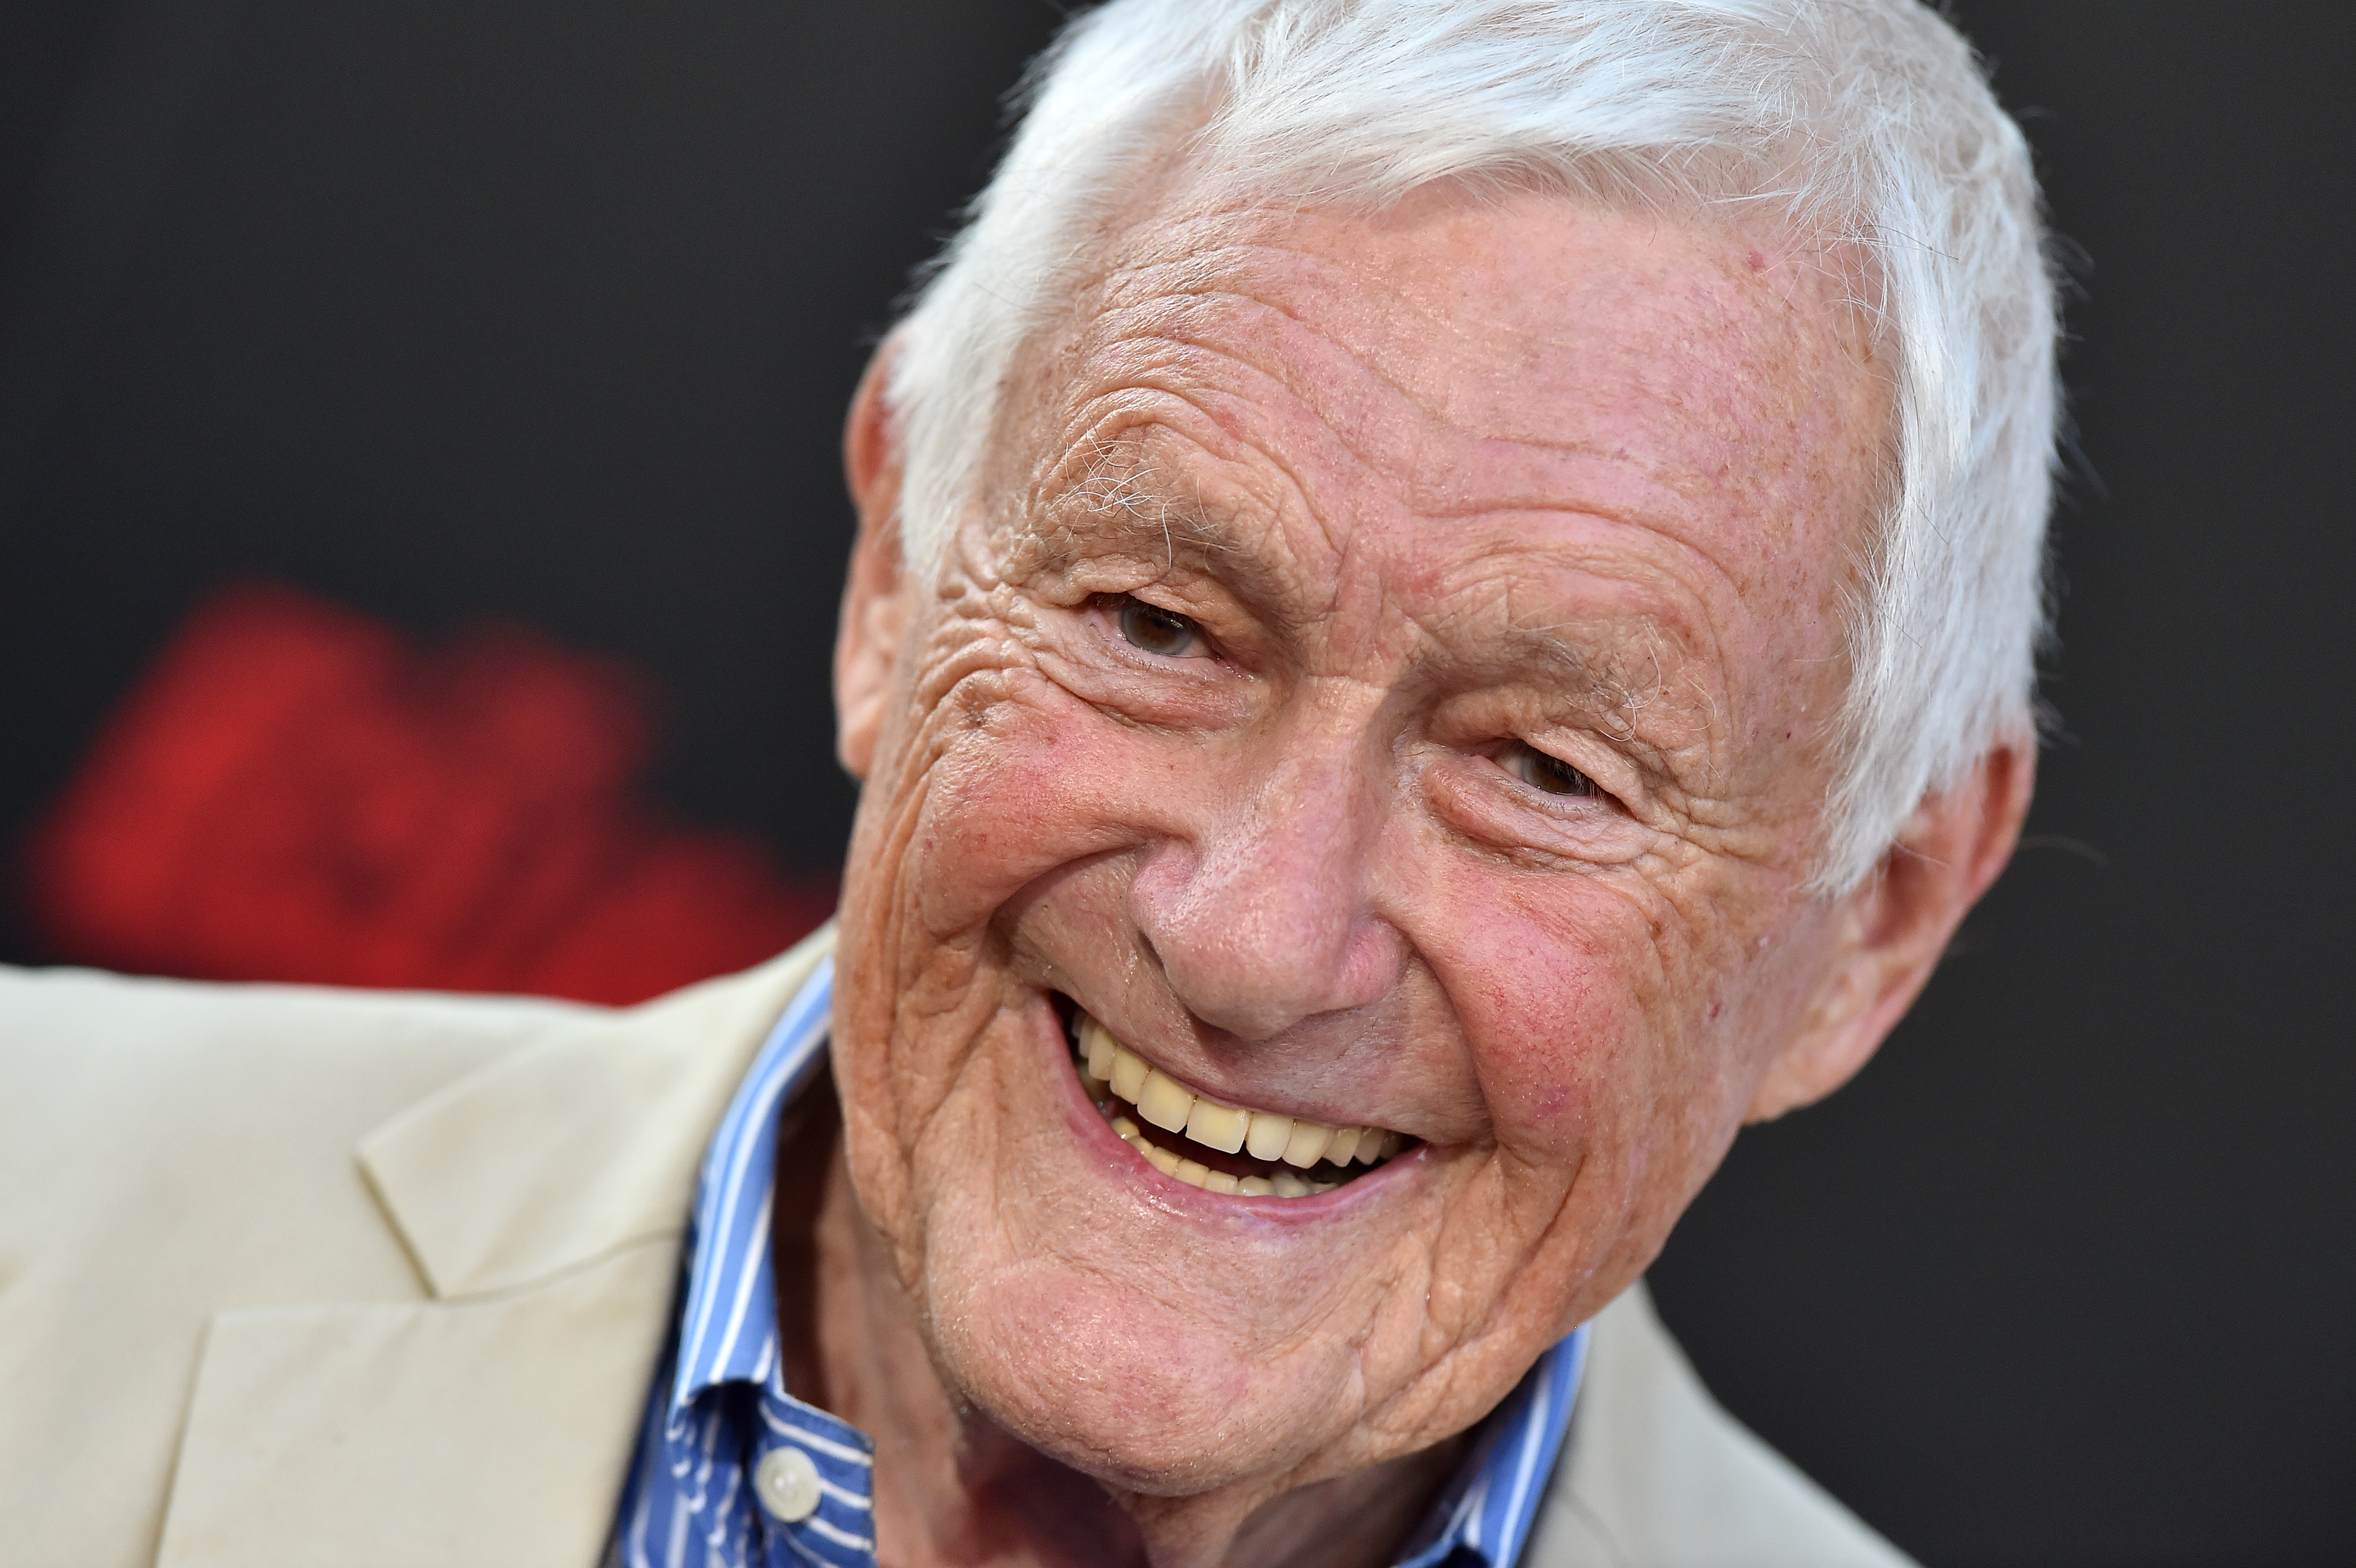 Orson Bean at the premiere of "The Equalizer 2" on July 17, 2018, in Hollywood, California | Source: Getty Images